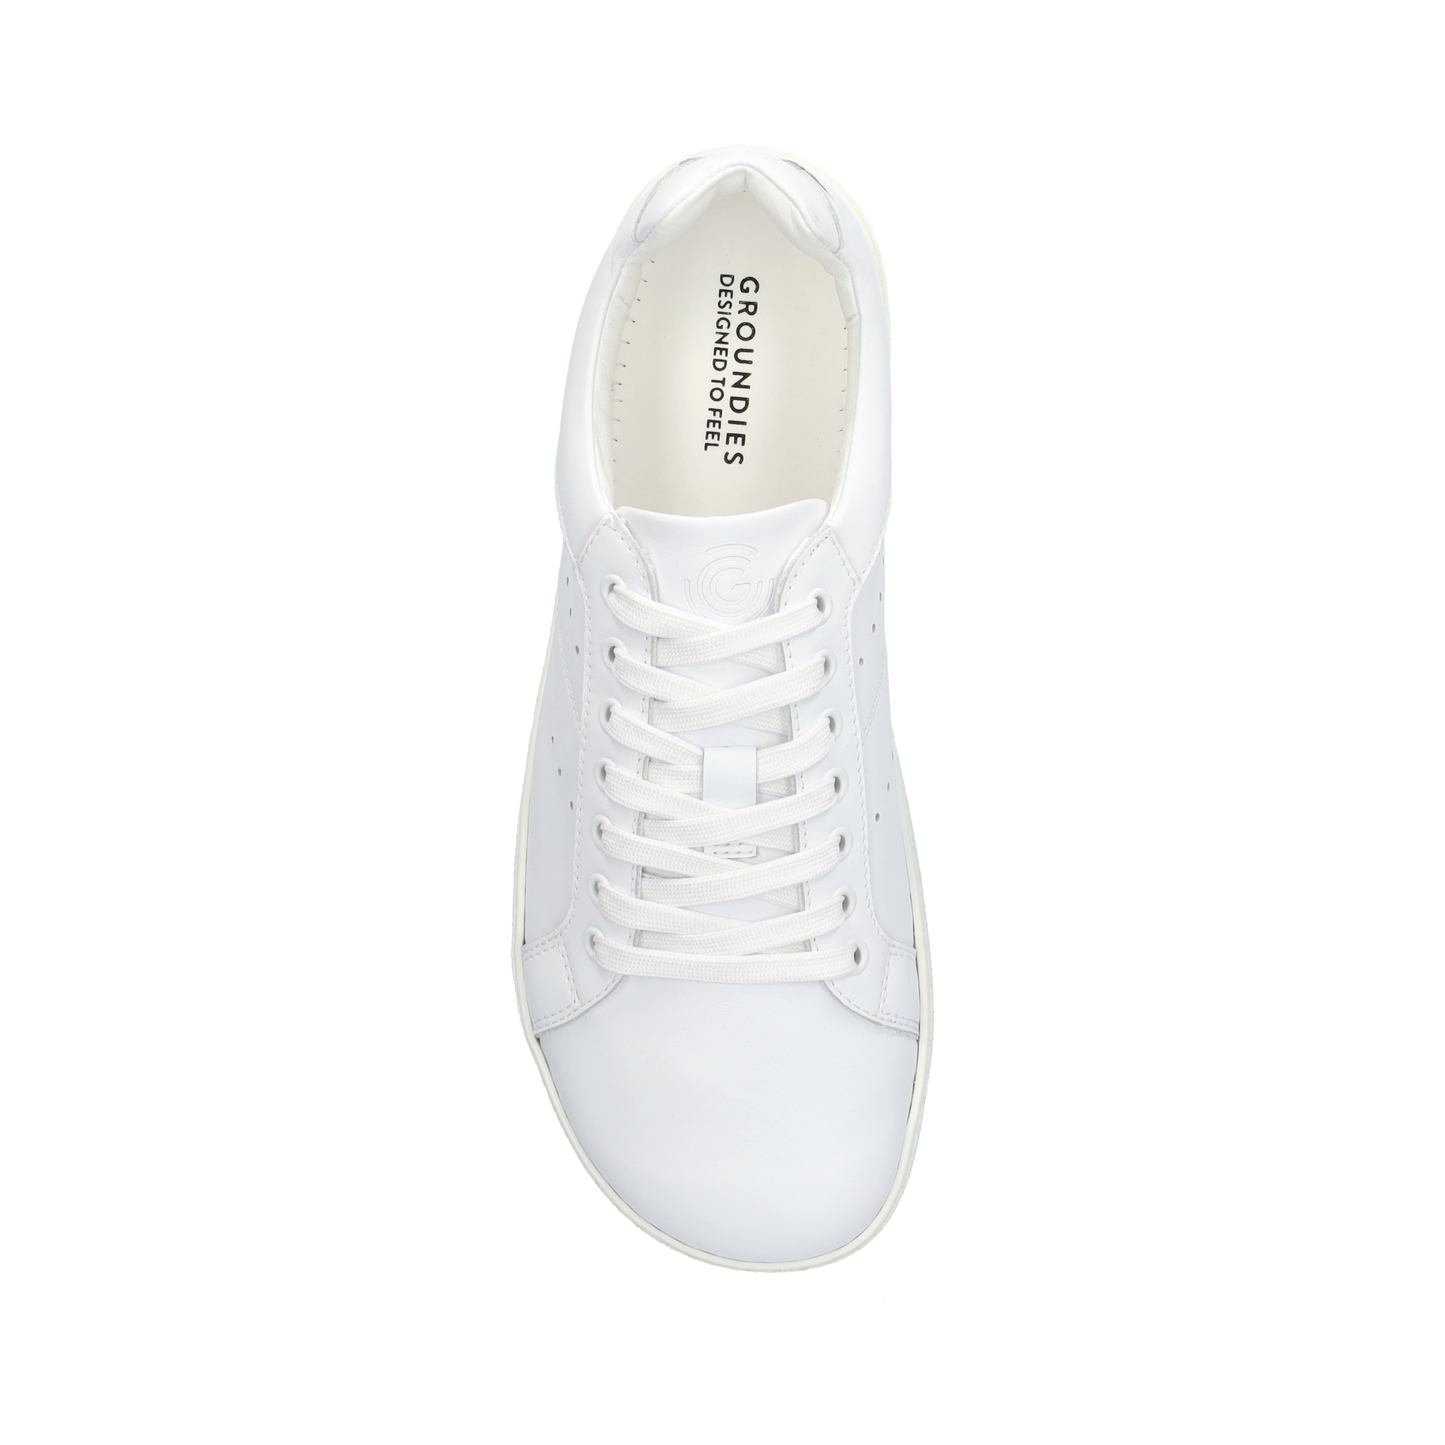 Groundies Universe Pure barfods sneakers til mænd i farven white, top